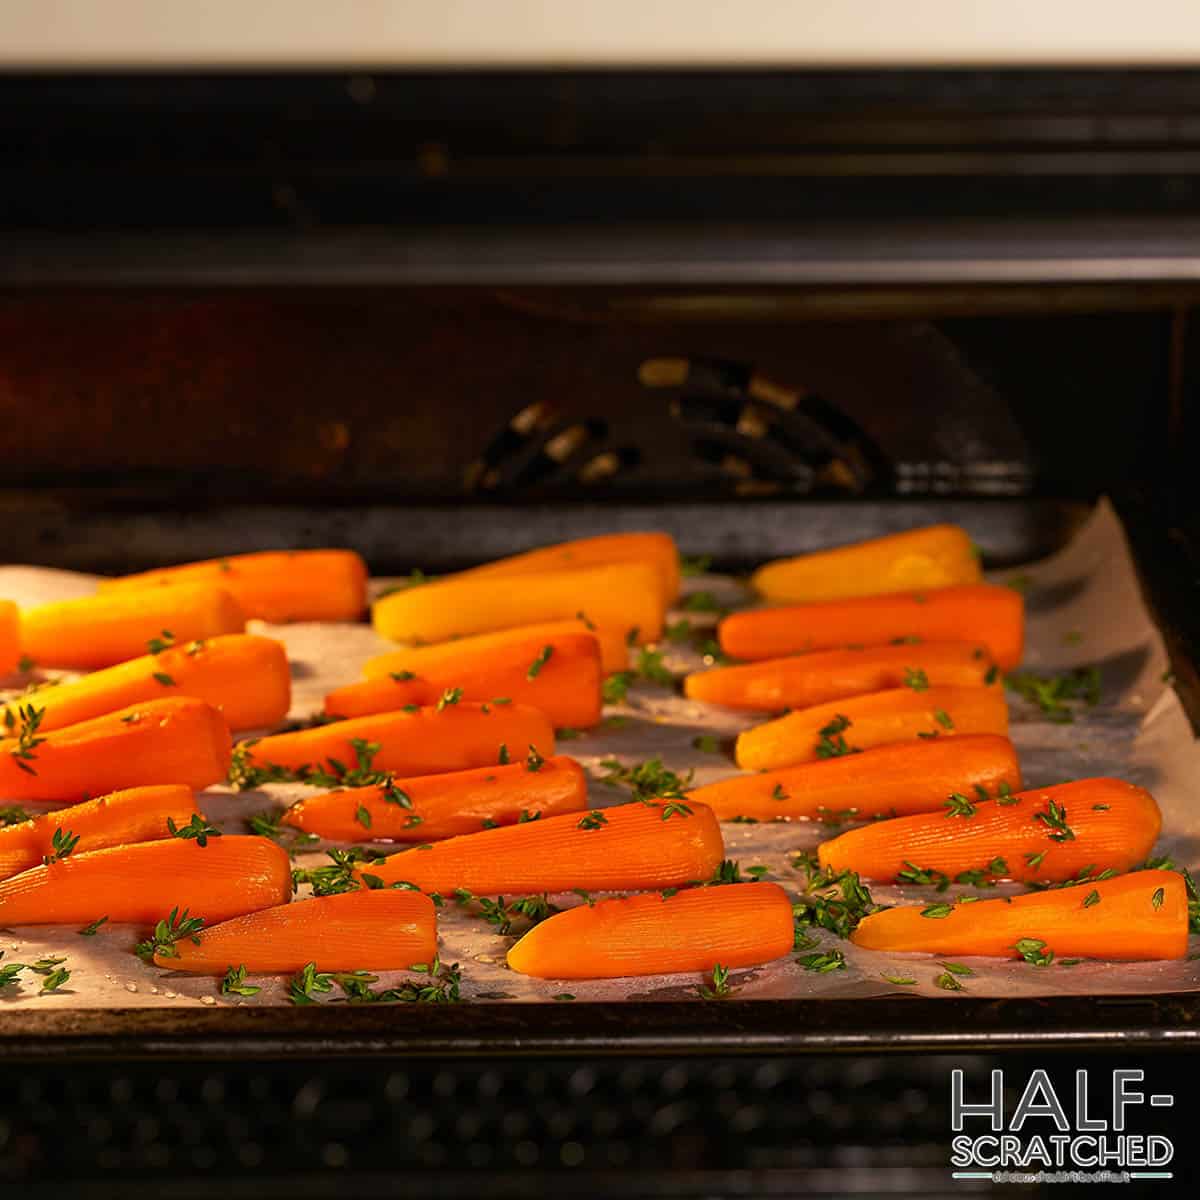 Peeled carrots in the oven